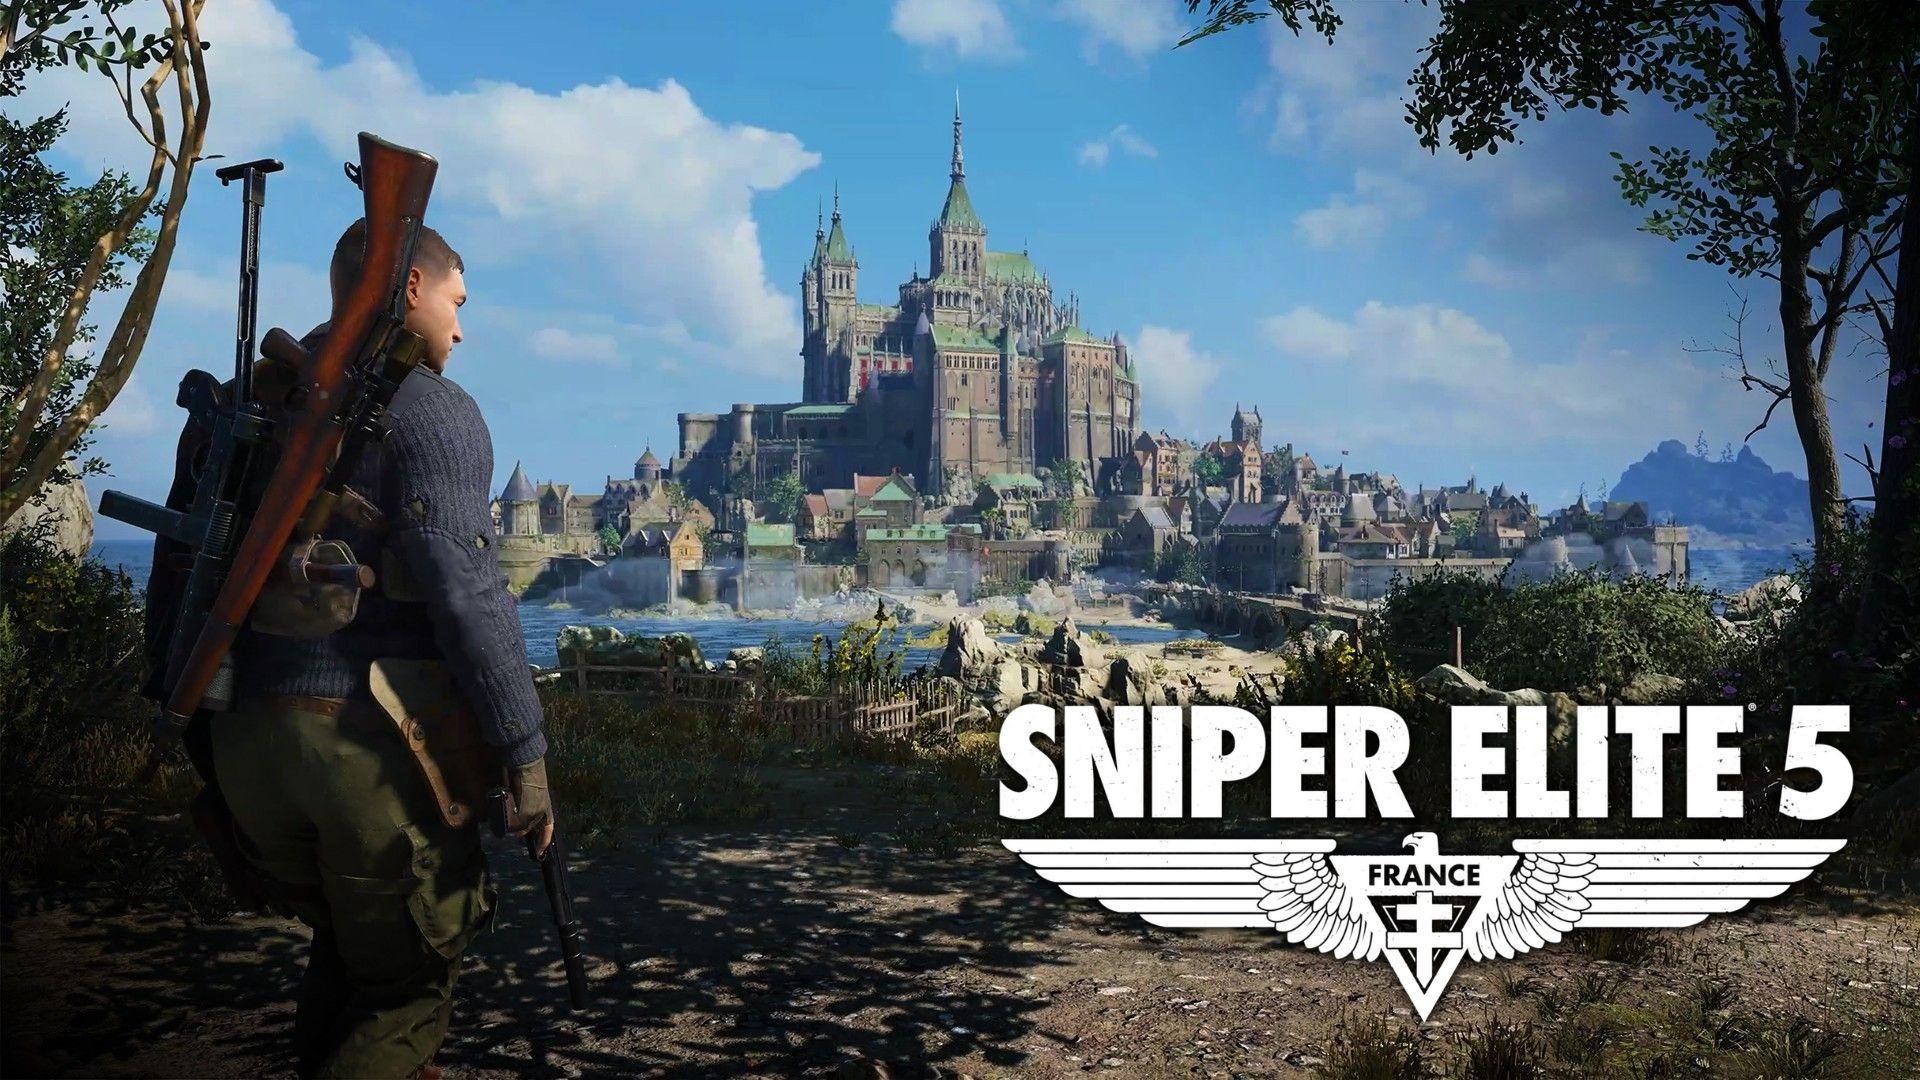 sniper elite character eyeing up property